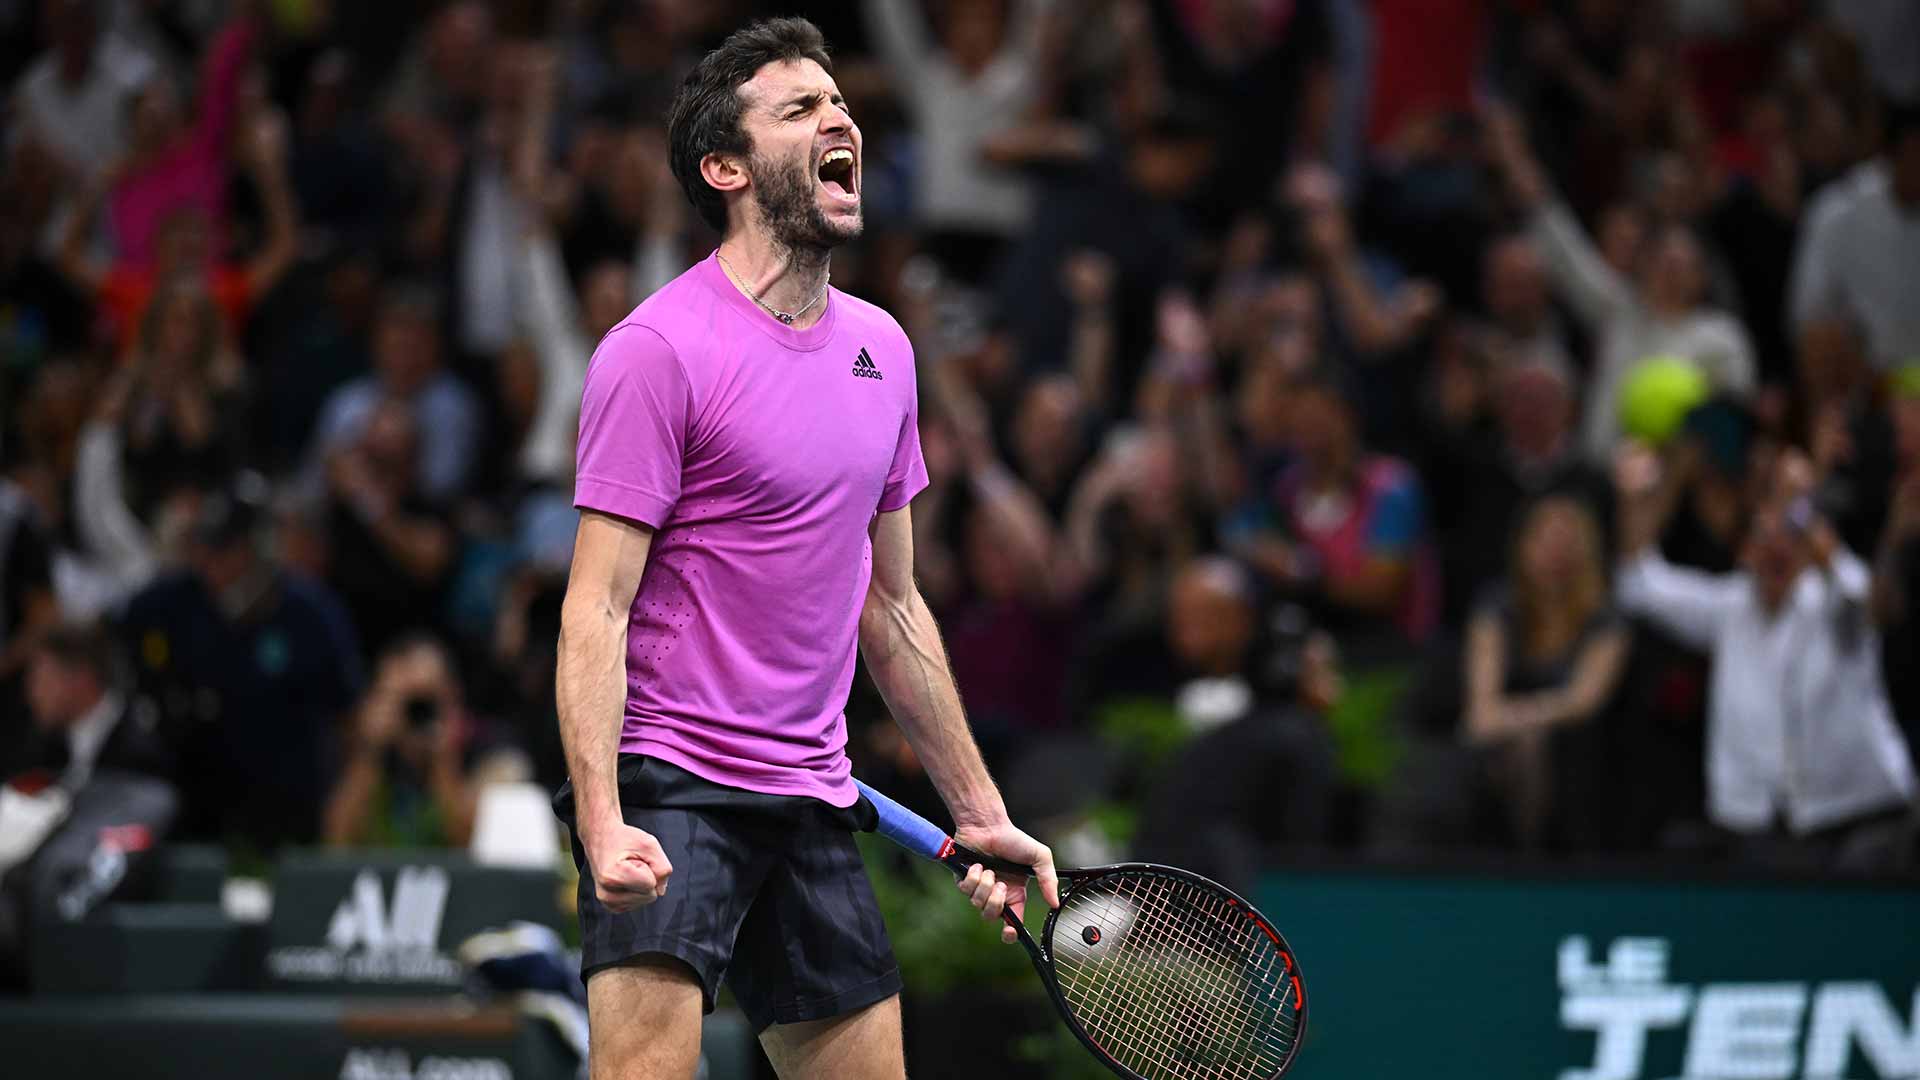 <a href='https://www.atptour.com/en/players/gilles-simon/sd32/overview'>Gilles Simon</a> brings French fans to their feet with his upset win over <a href='https://www.atptour.com/en/players/taylor-fritz/fb98/overview'>Taylor Fritz</a>.